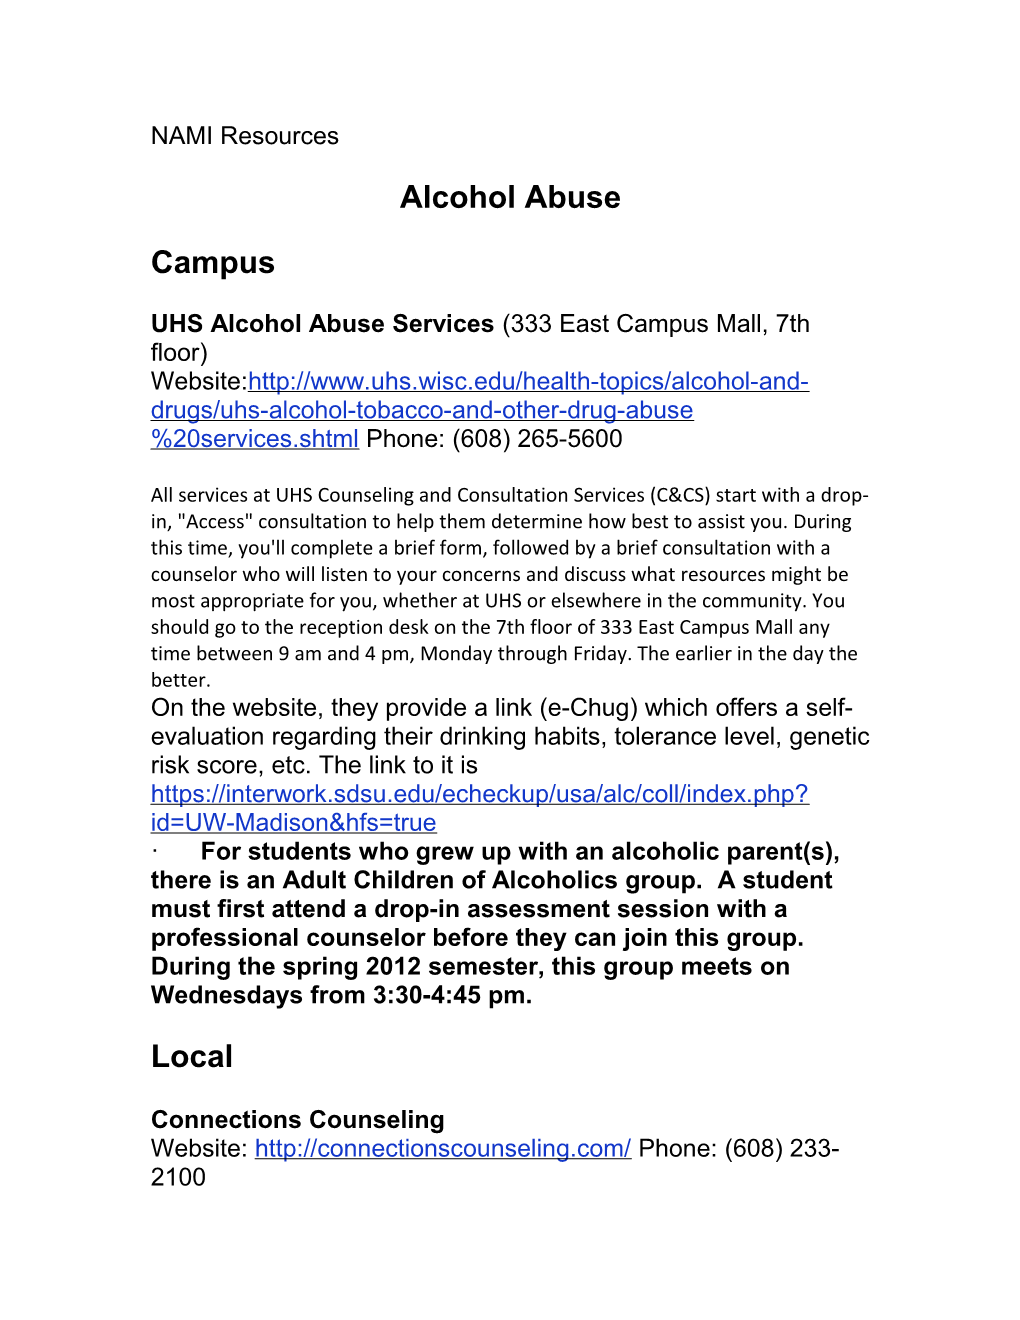 UHS Alcohol Abuse Services (333 East Campus Mall, 7Th Floor)